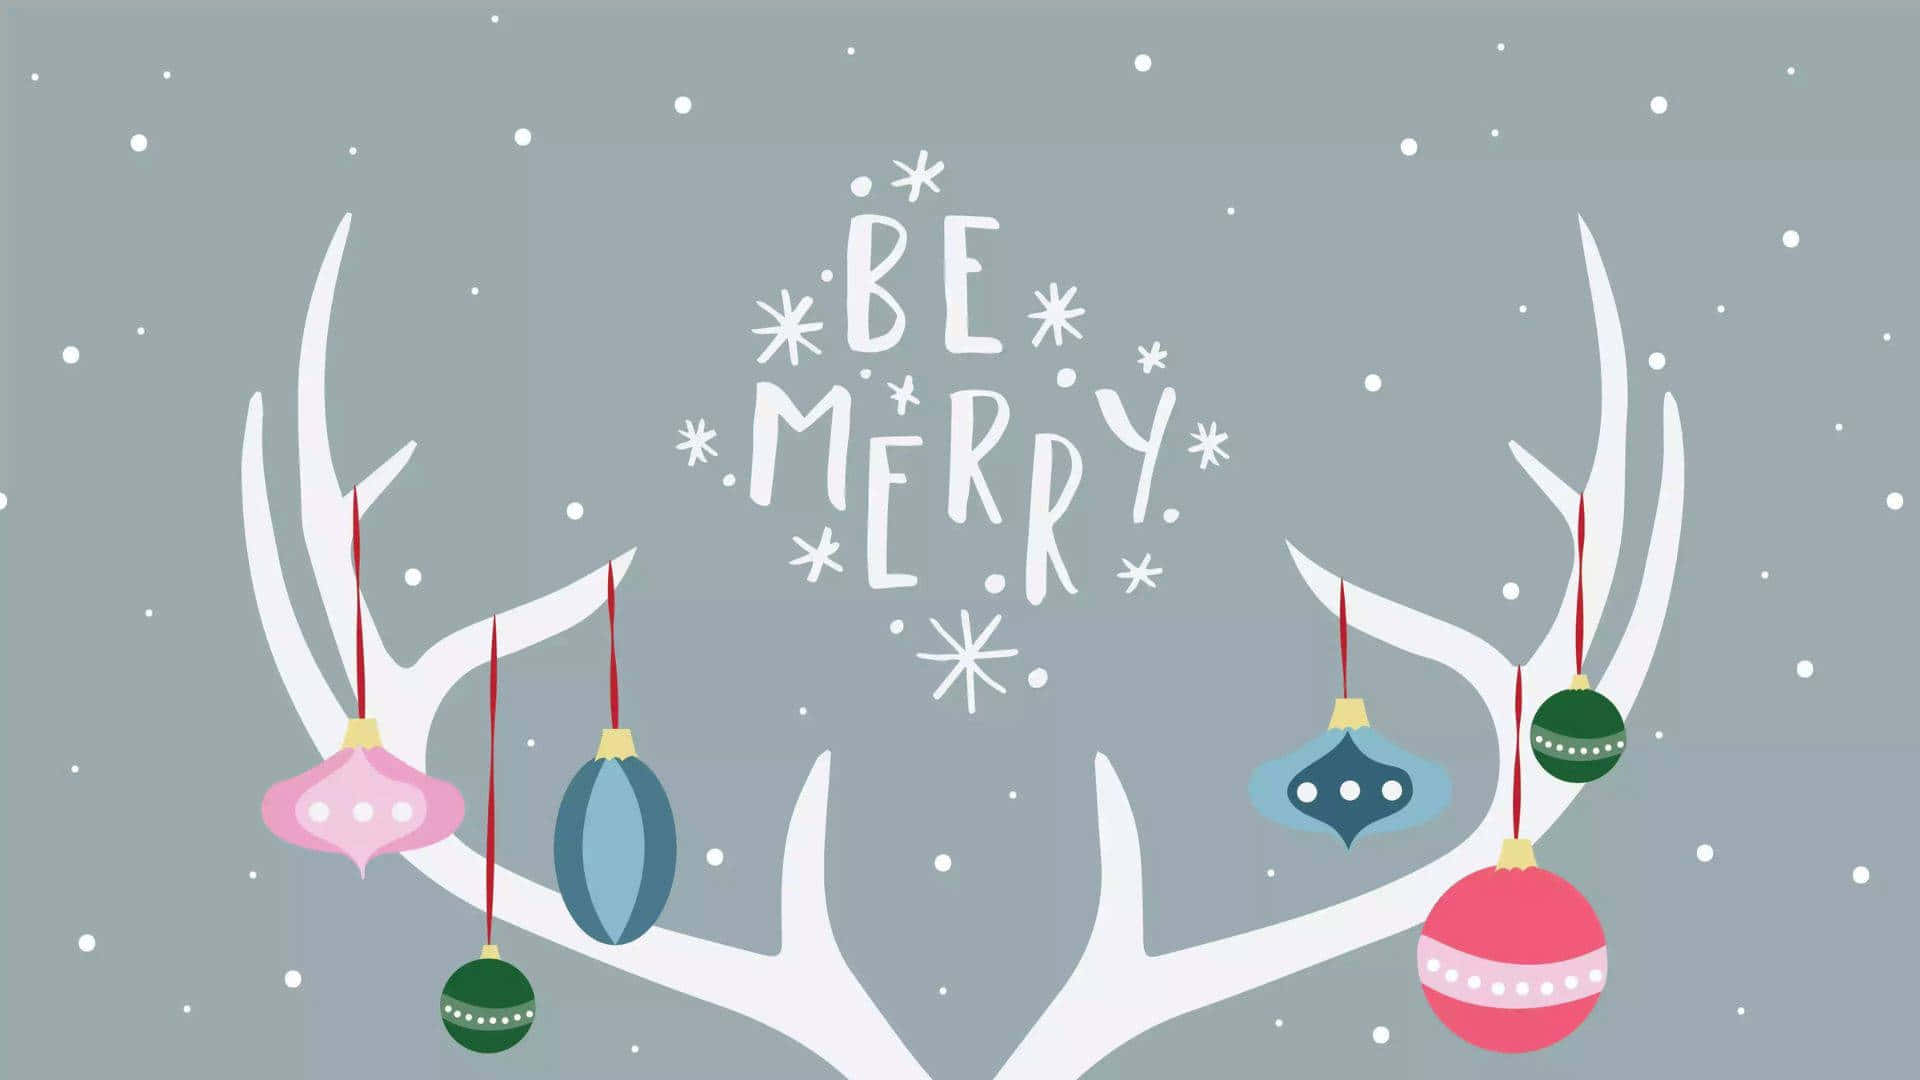 Celebrate this holiday season with this cute Christmas background